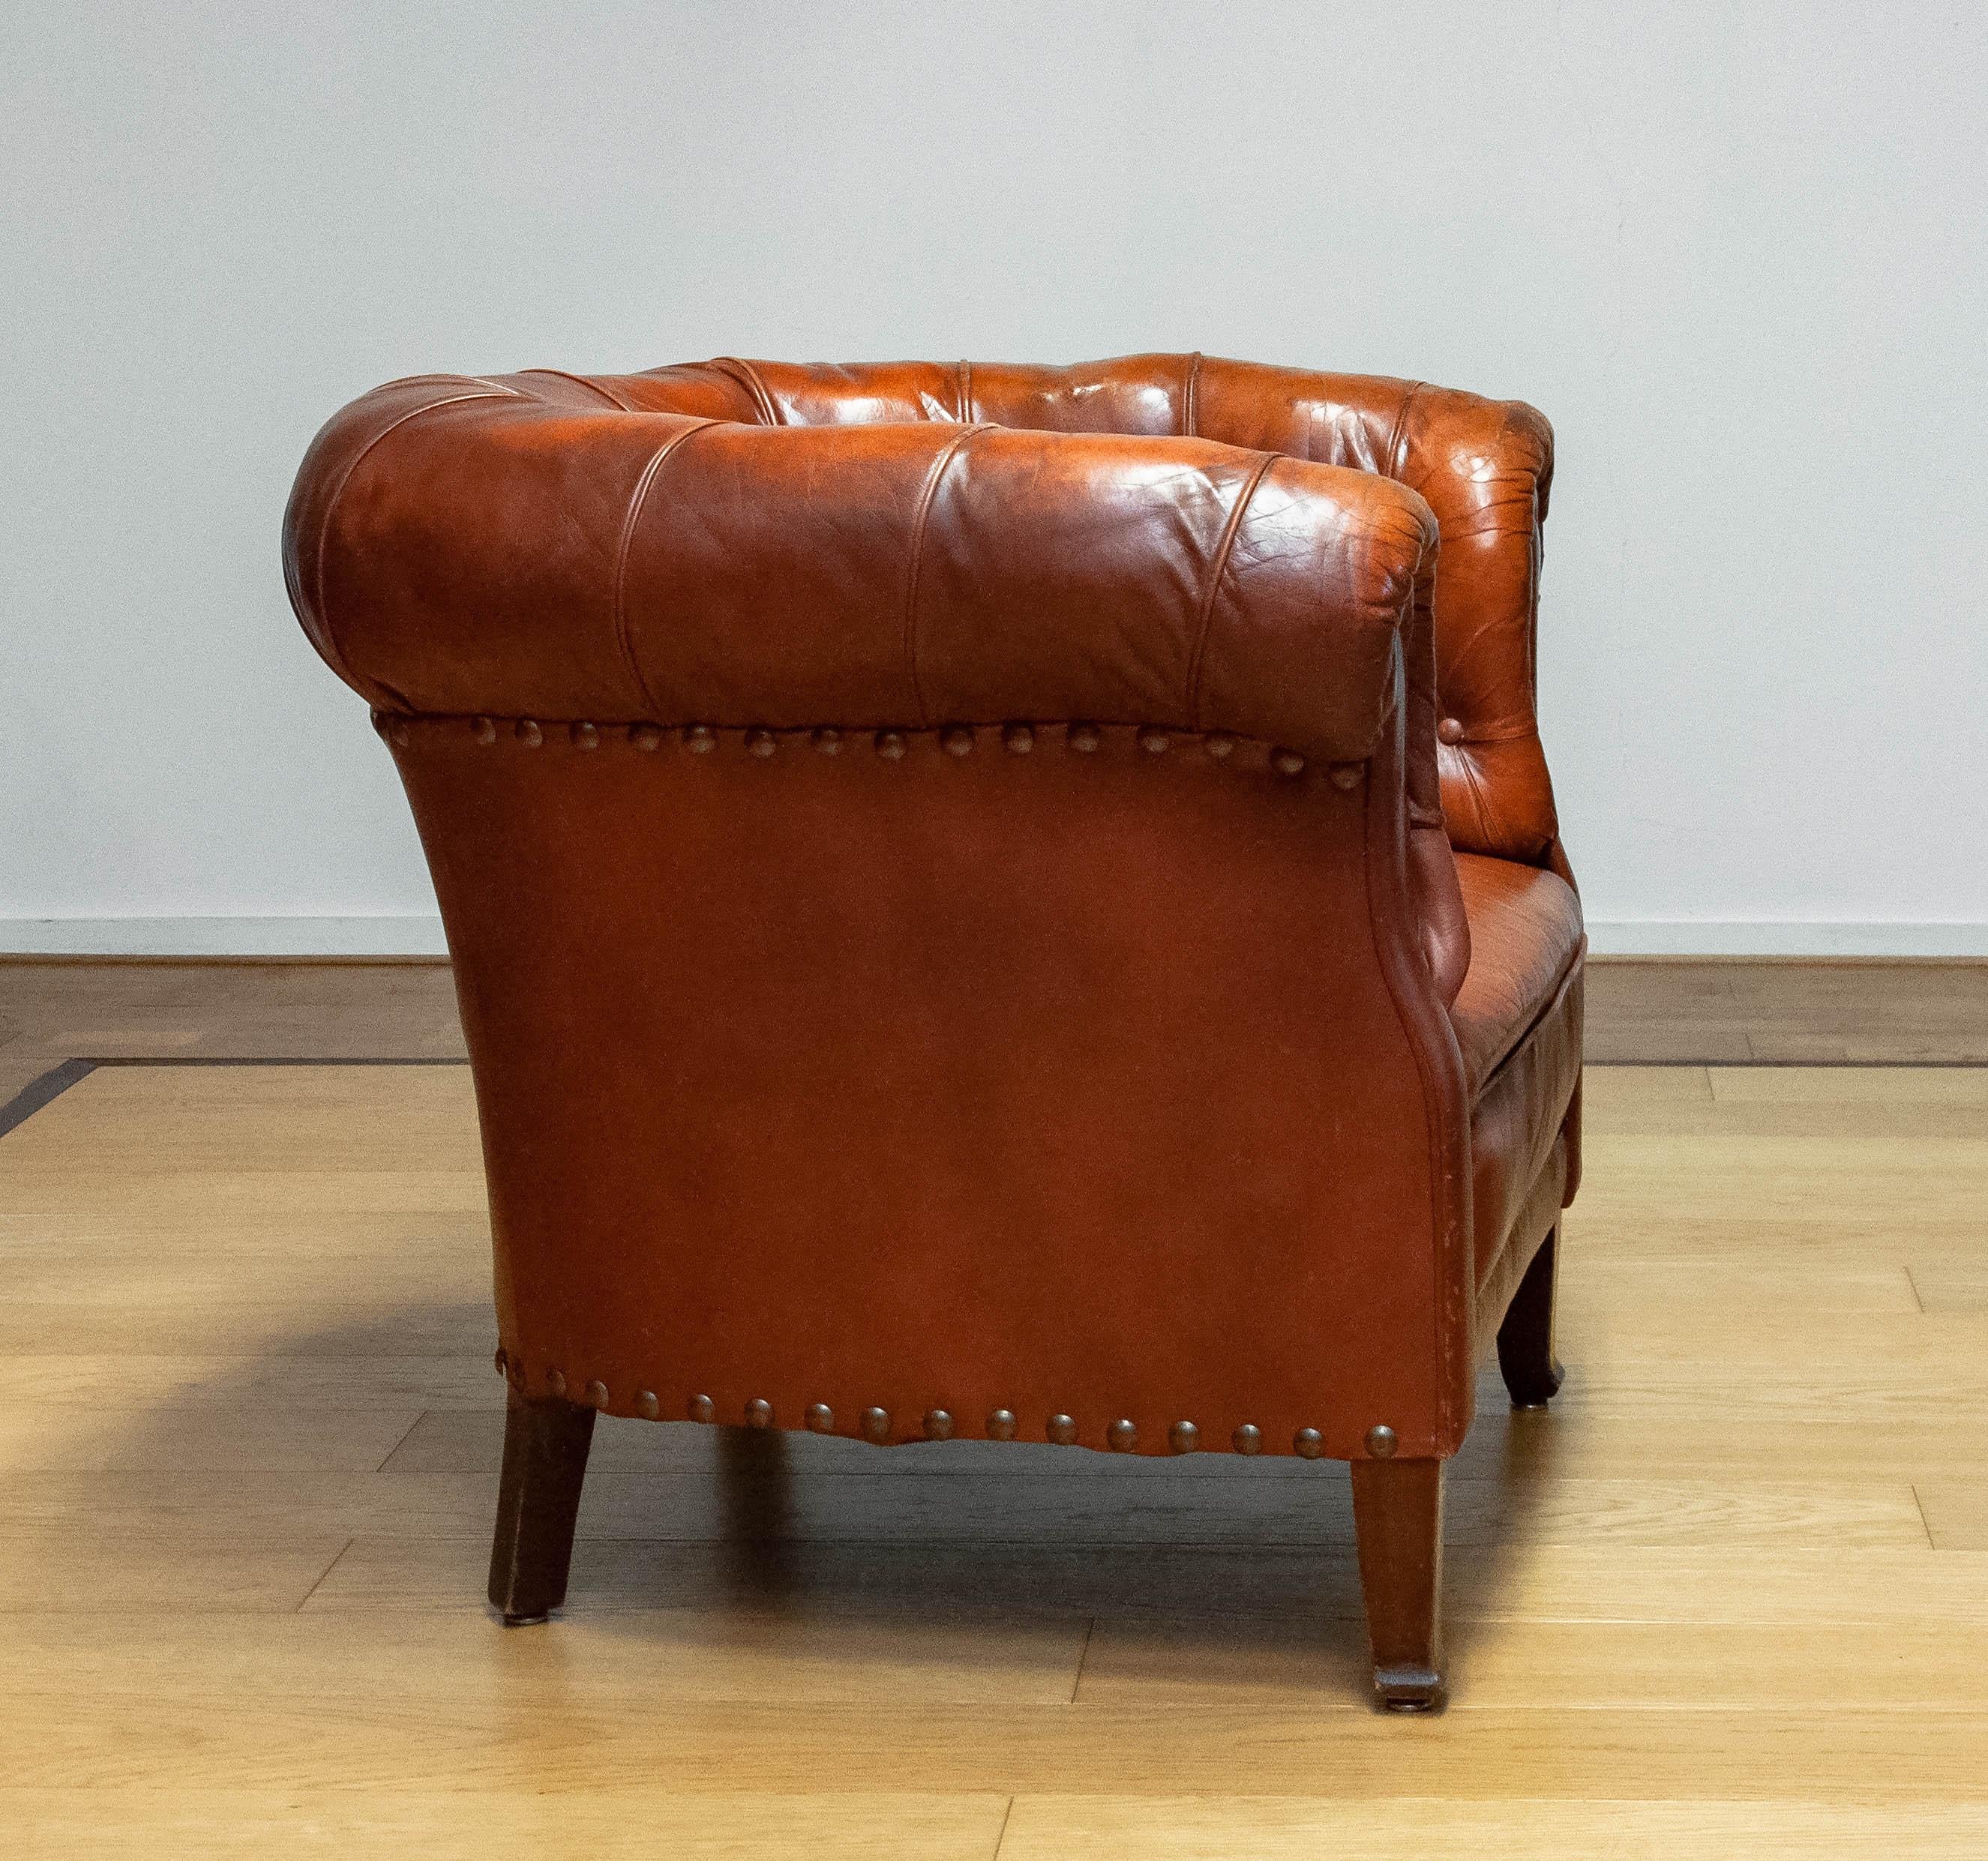 1940s Swedish Tufted Club Chair 'Chesterfield Model' In Tan Brown Worn Leather 3